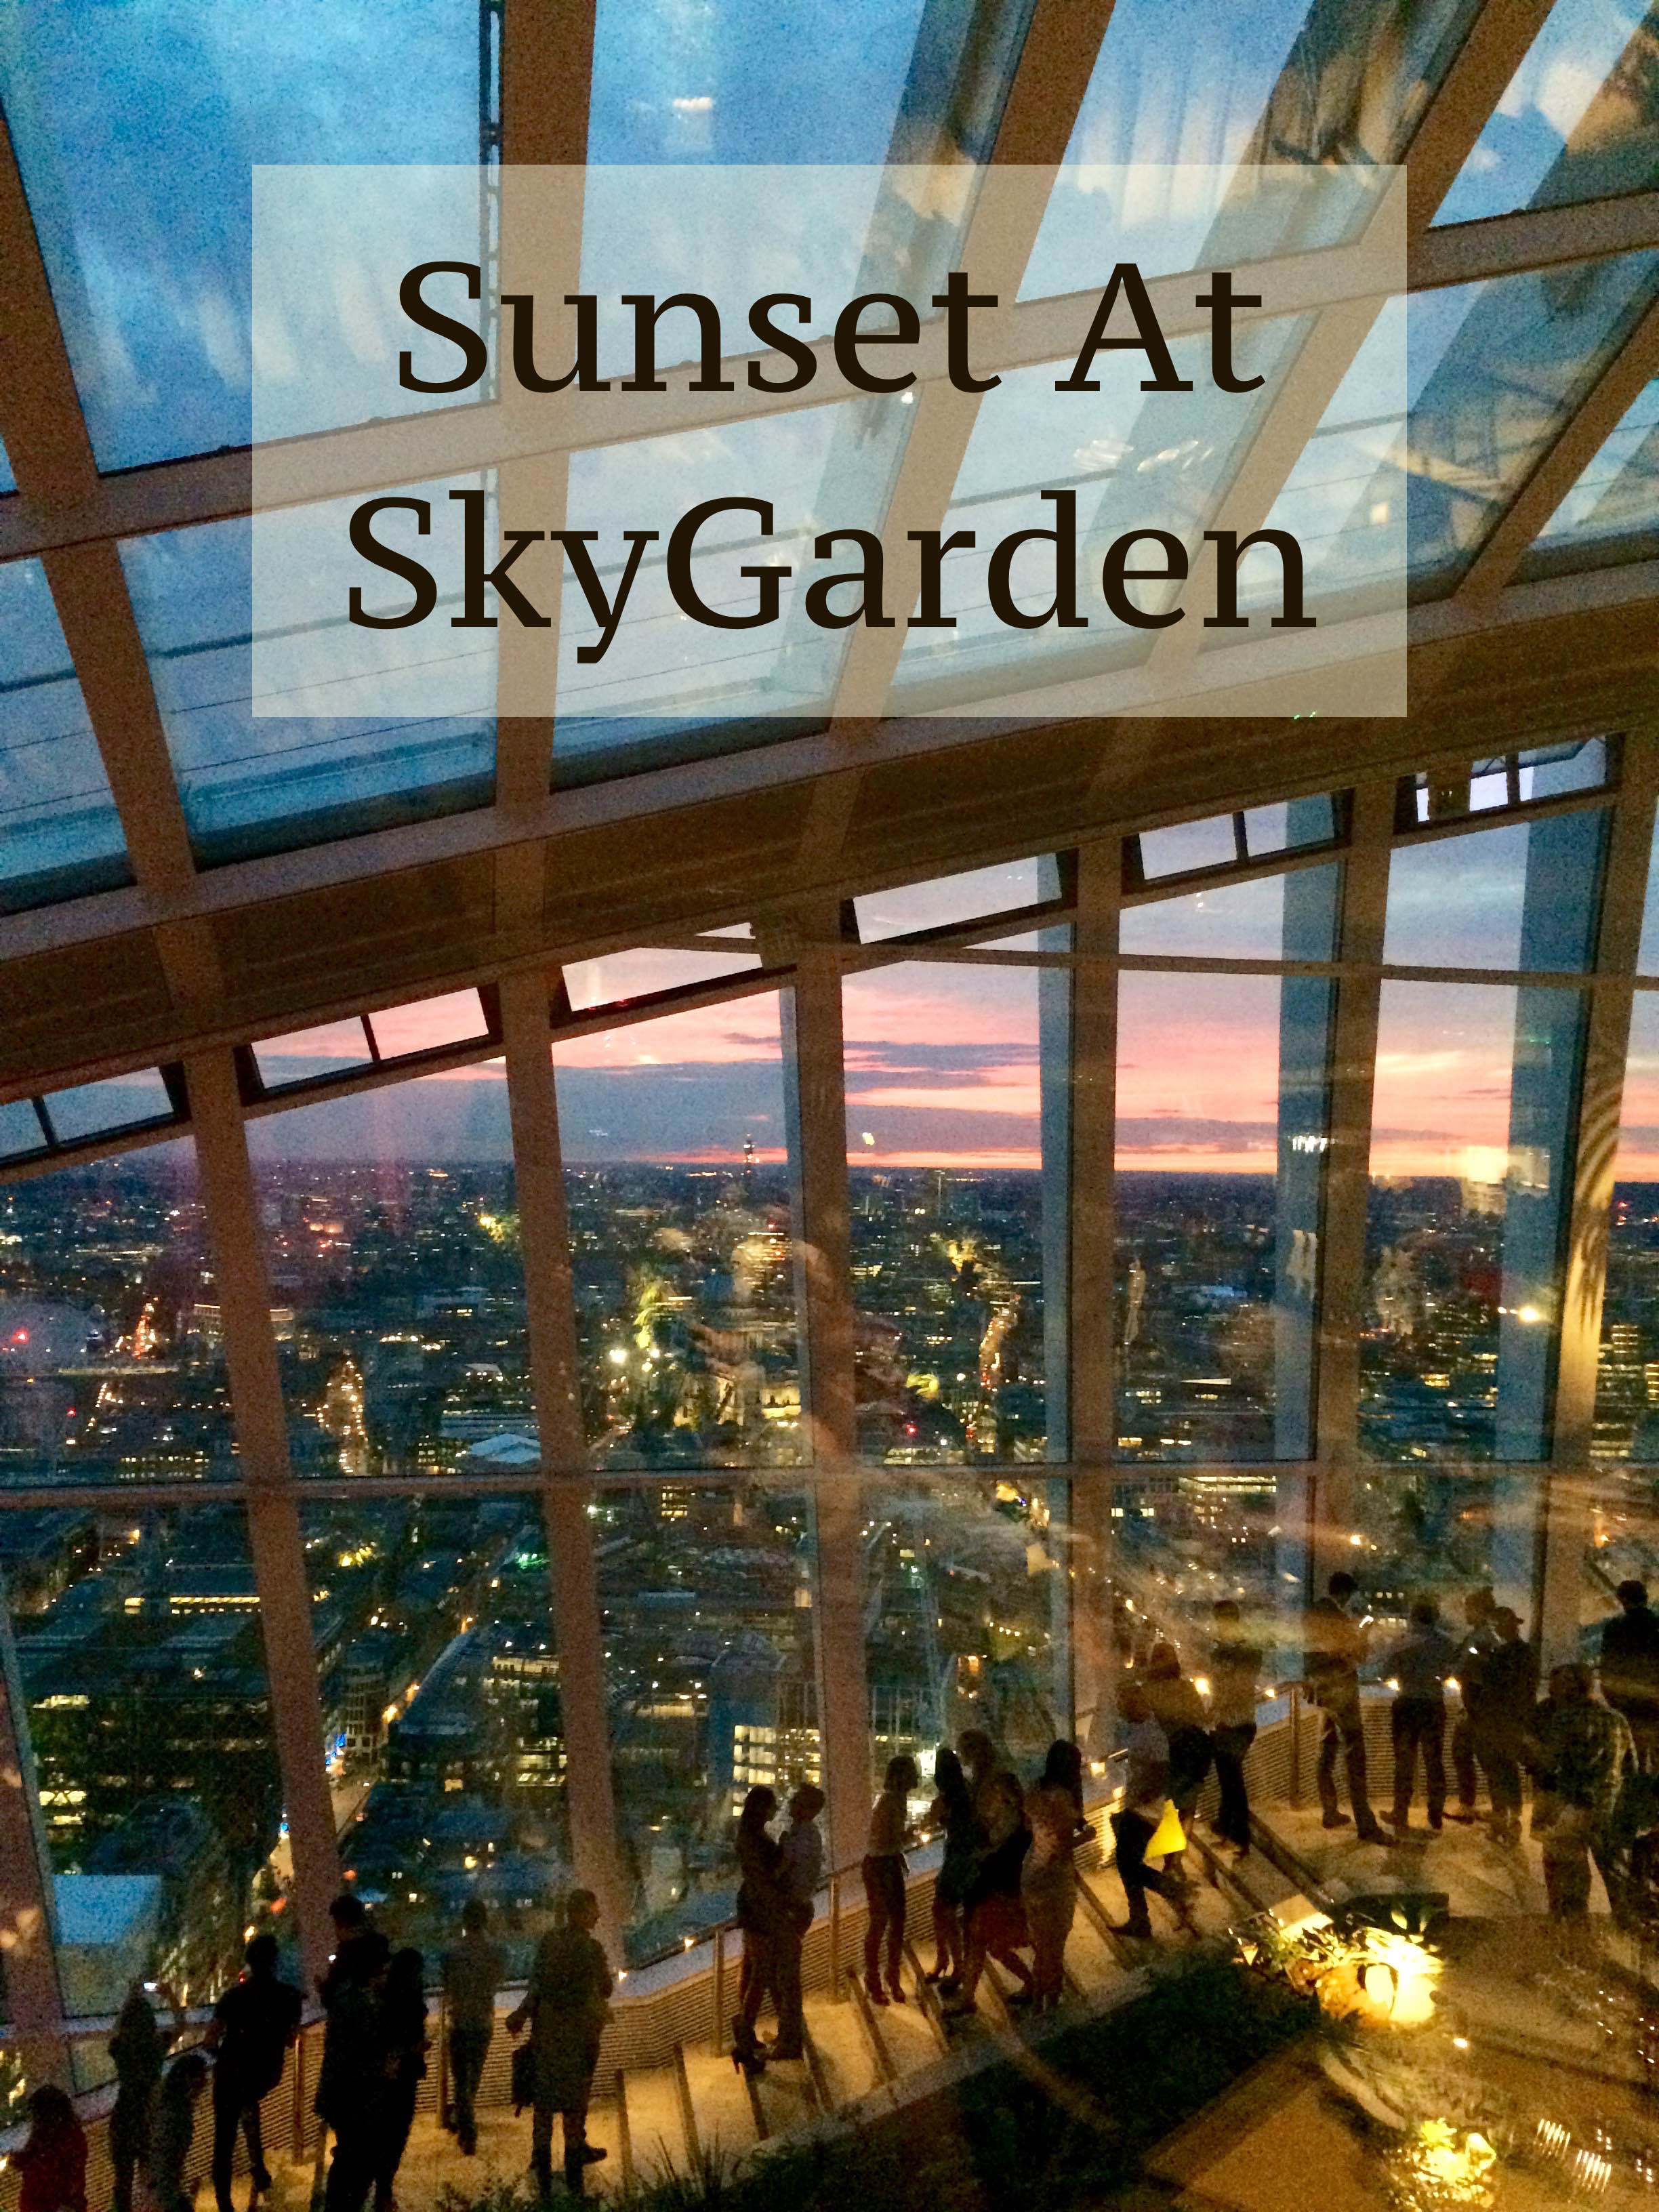 Optagelsesgebyr hellige brysomme A Stunning Sunset at SkyGarden - Two Feet, One World